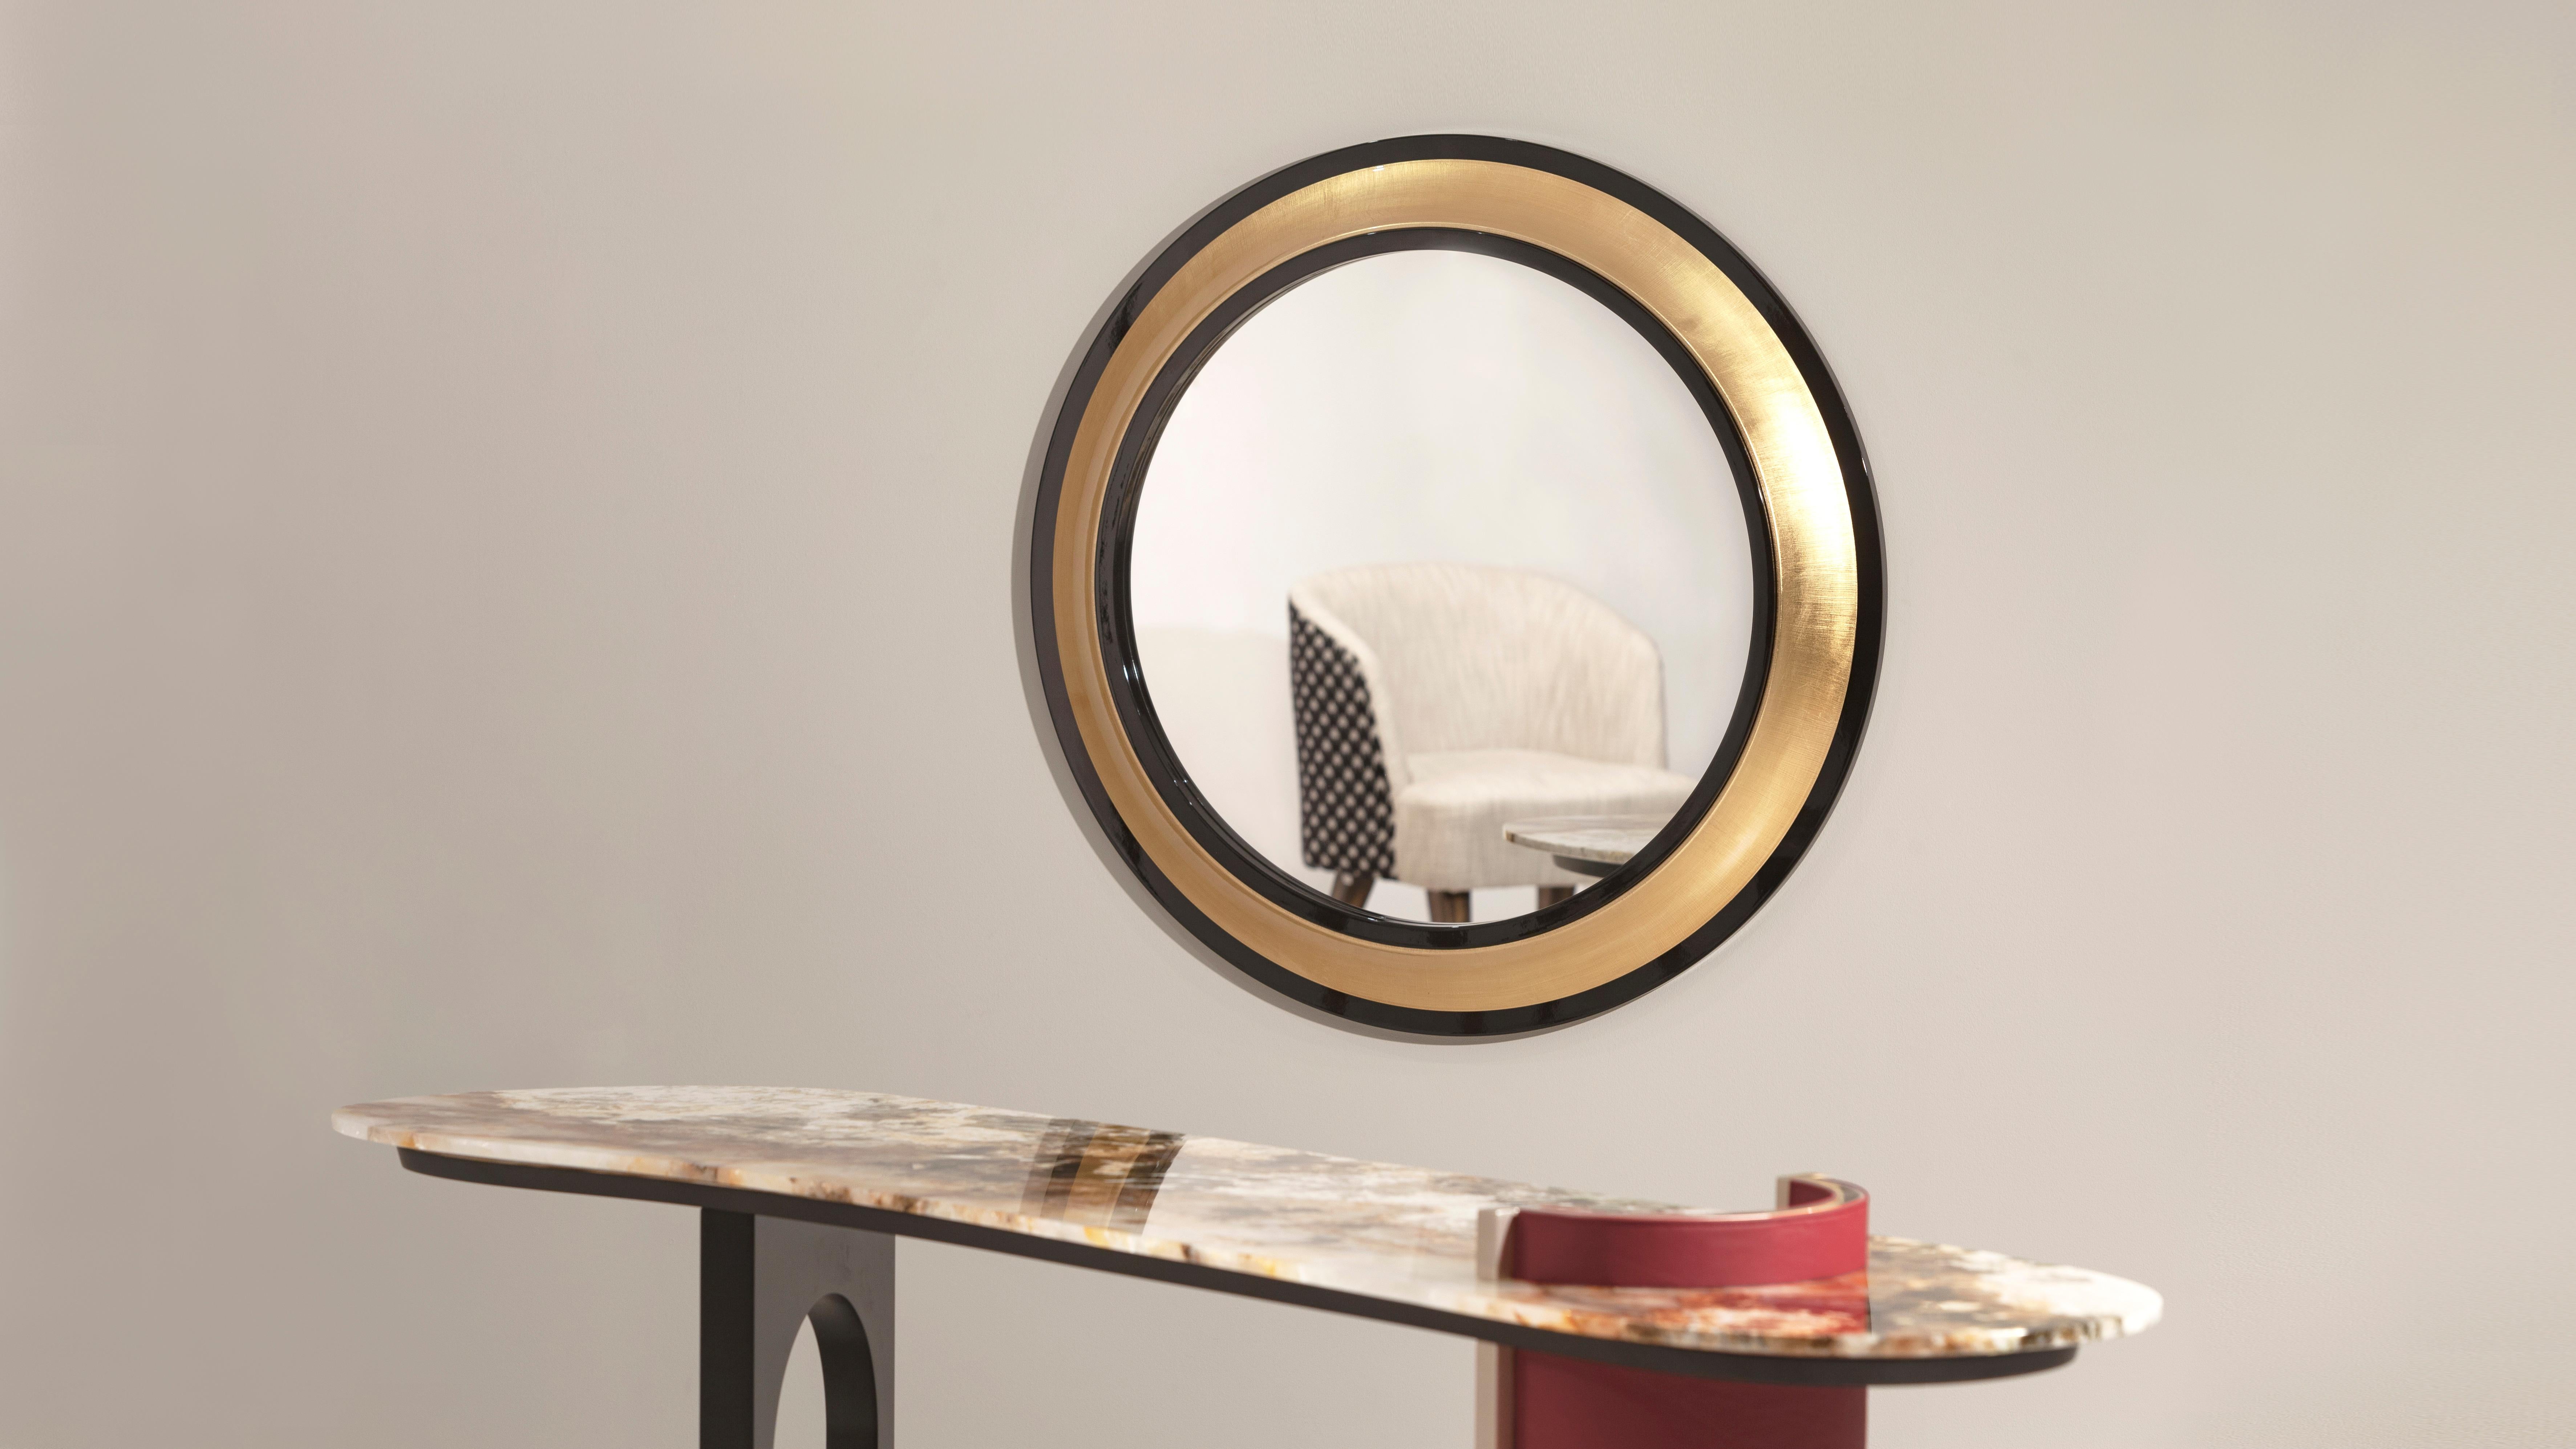 Grifo Wall Mirror, Modern Collection, Handcrafted in Portugal - Europe by GF Modern.

Grifo is a round mirror in a classical style that reflects his graceful personality. The vivid contrast between the two black rings and the central ring of